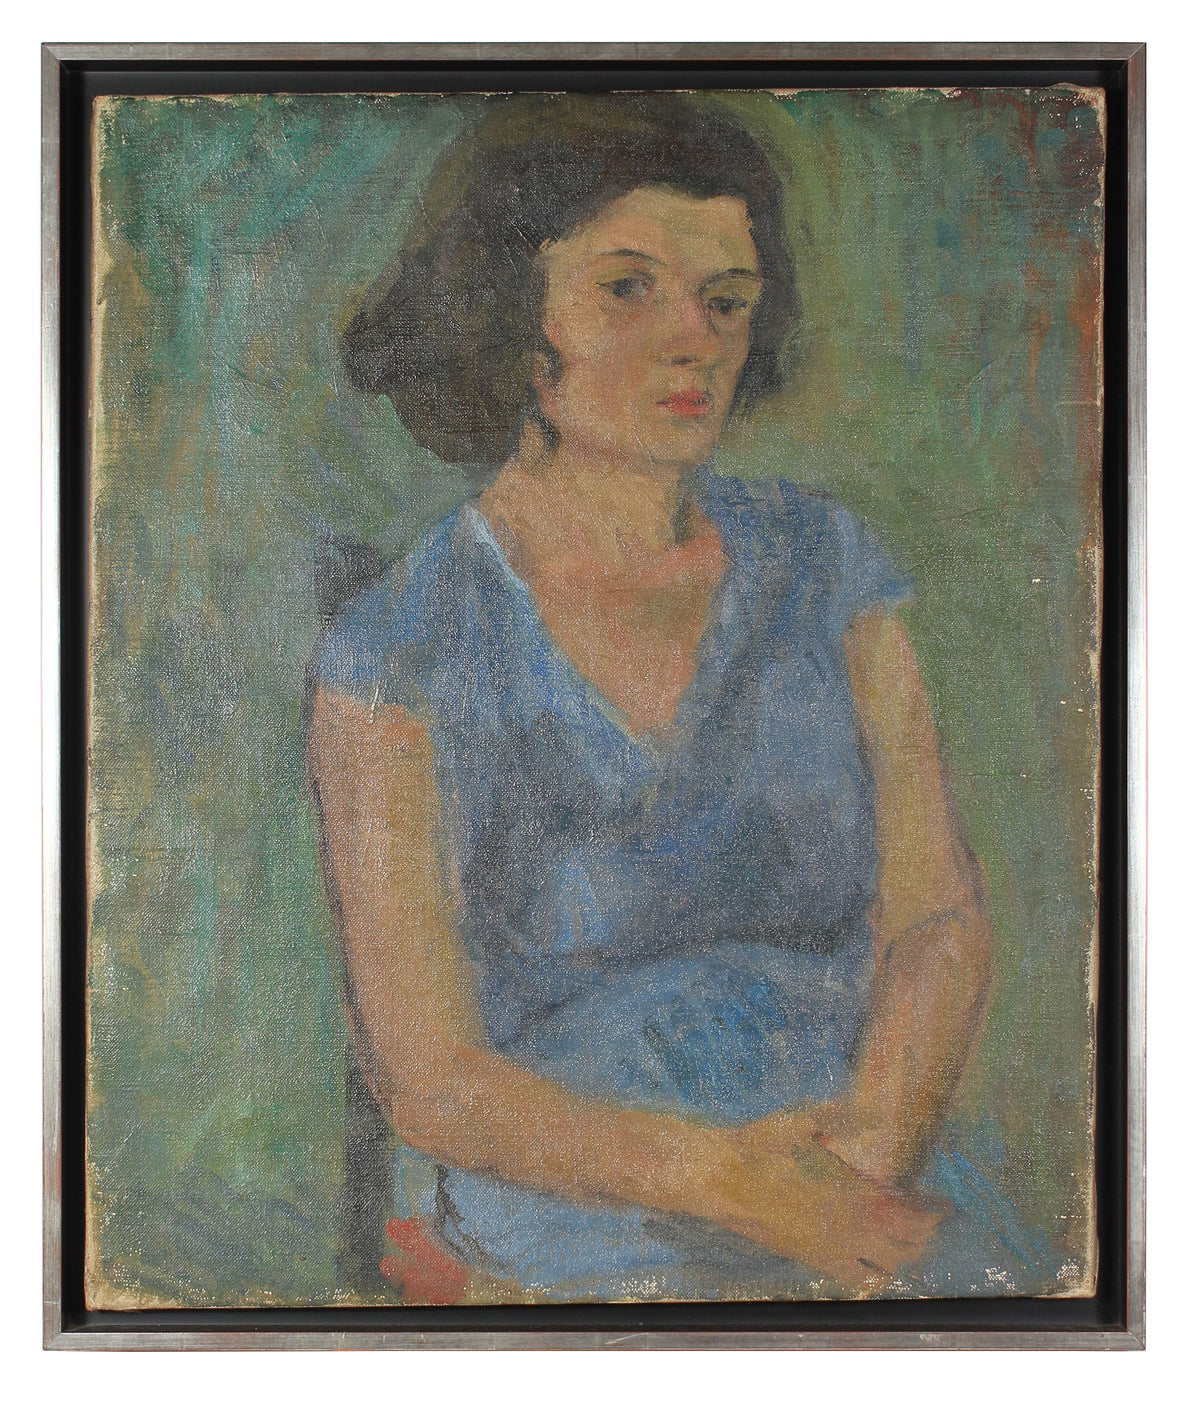 Seated Woman in Blue&lt;br&gt;1940s Oil&lt;br&gt;&lt;br&gt;#13666